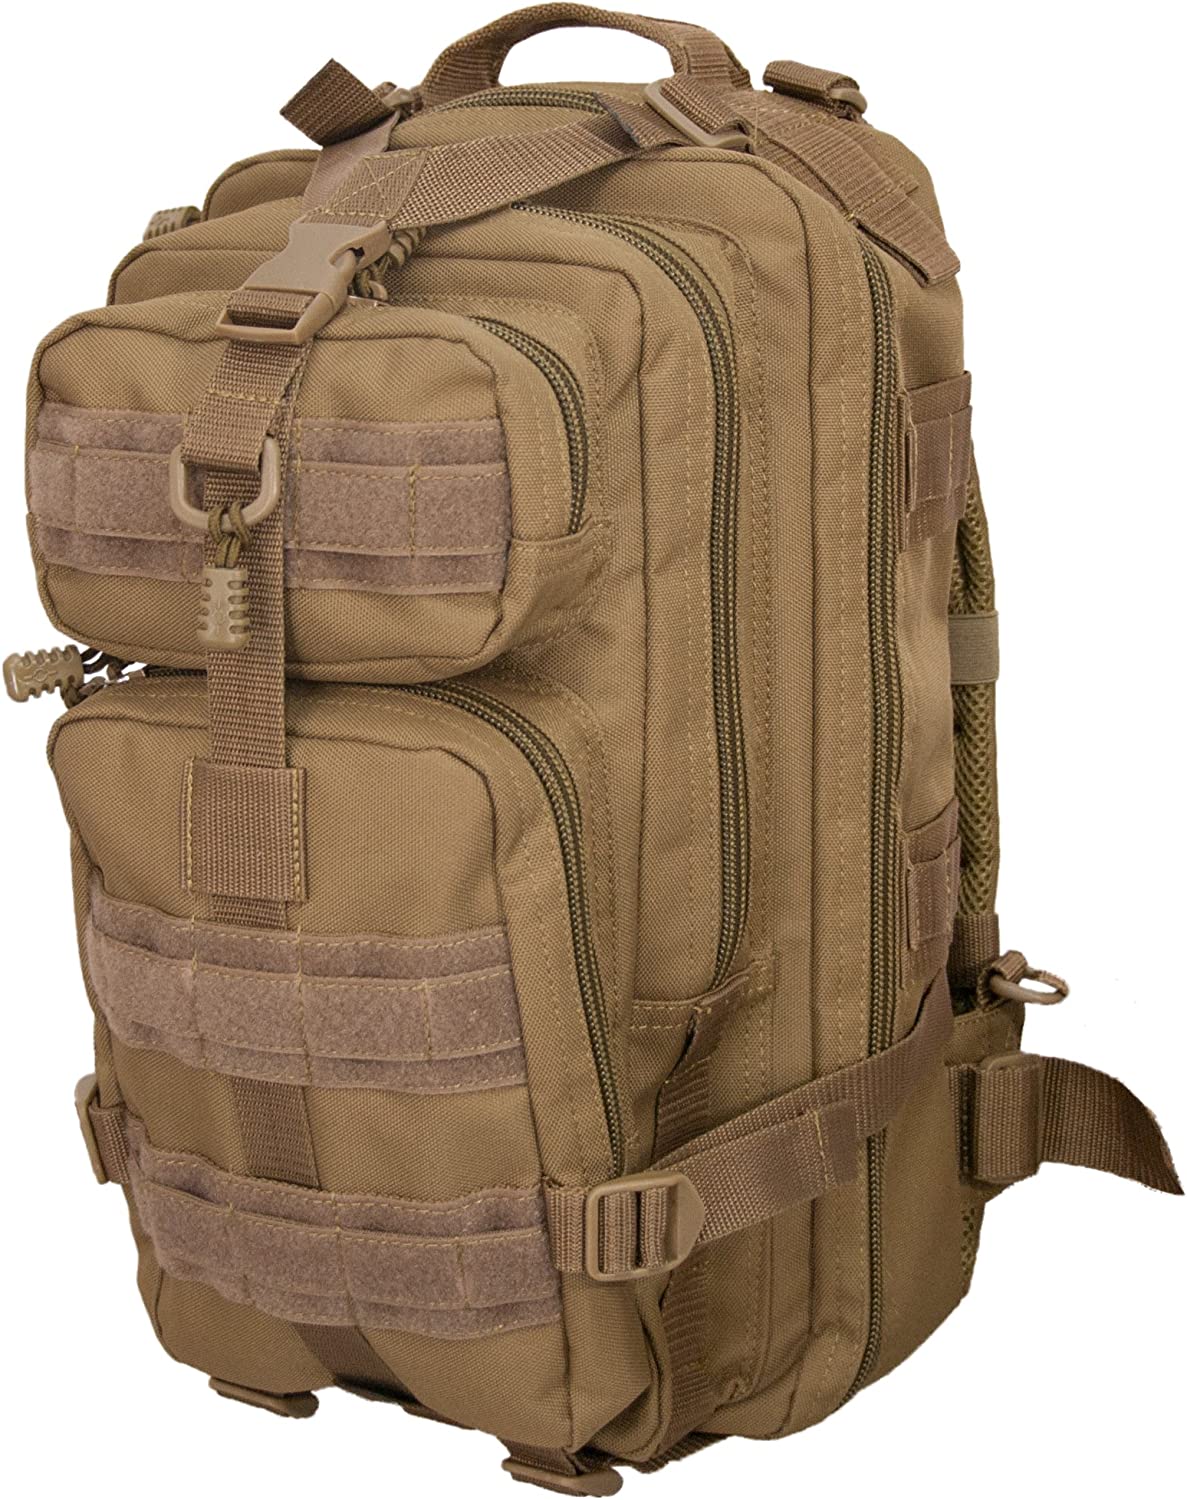 Presidio Tactical Assault Backpack – Military Approved Compact Backpack – Water Resistant 900D Polyester – Good From School To Combat – Features Large Center Pocket & MOLLE Webbing [Coyote Brow]